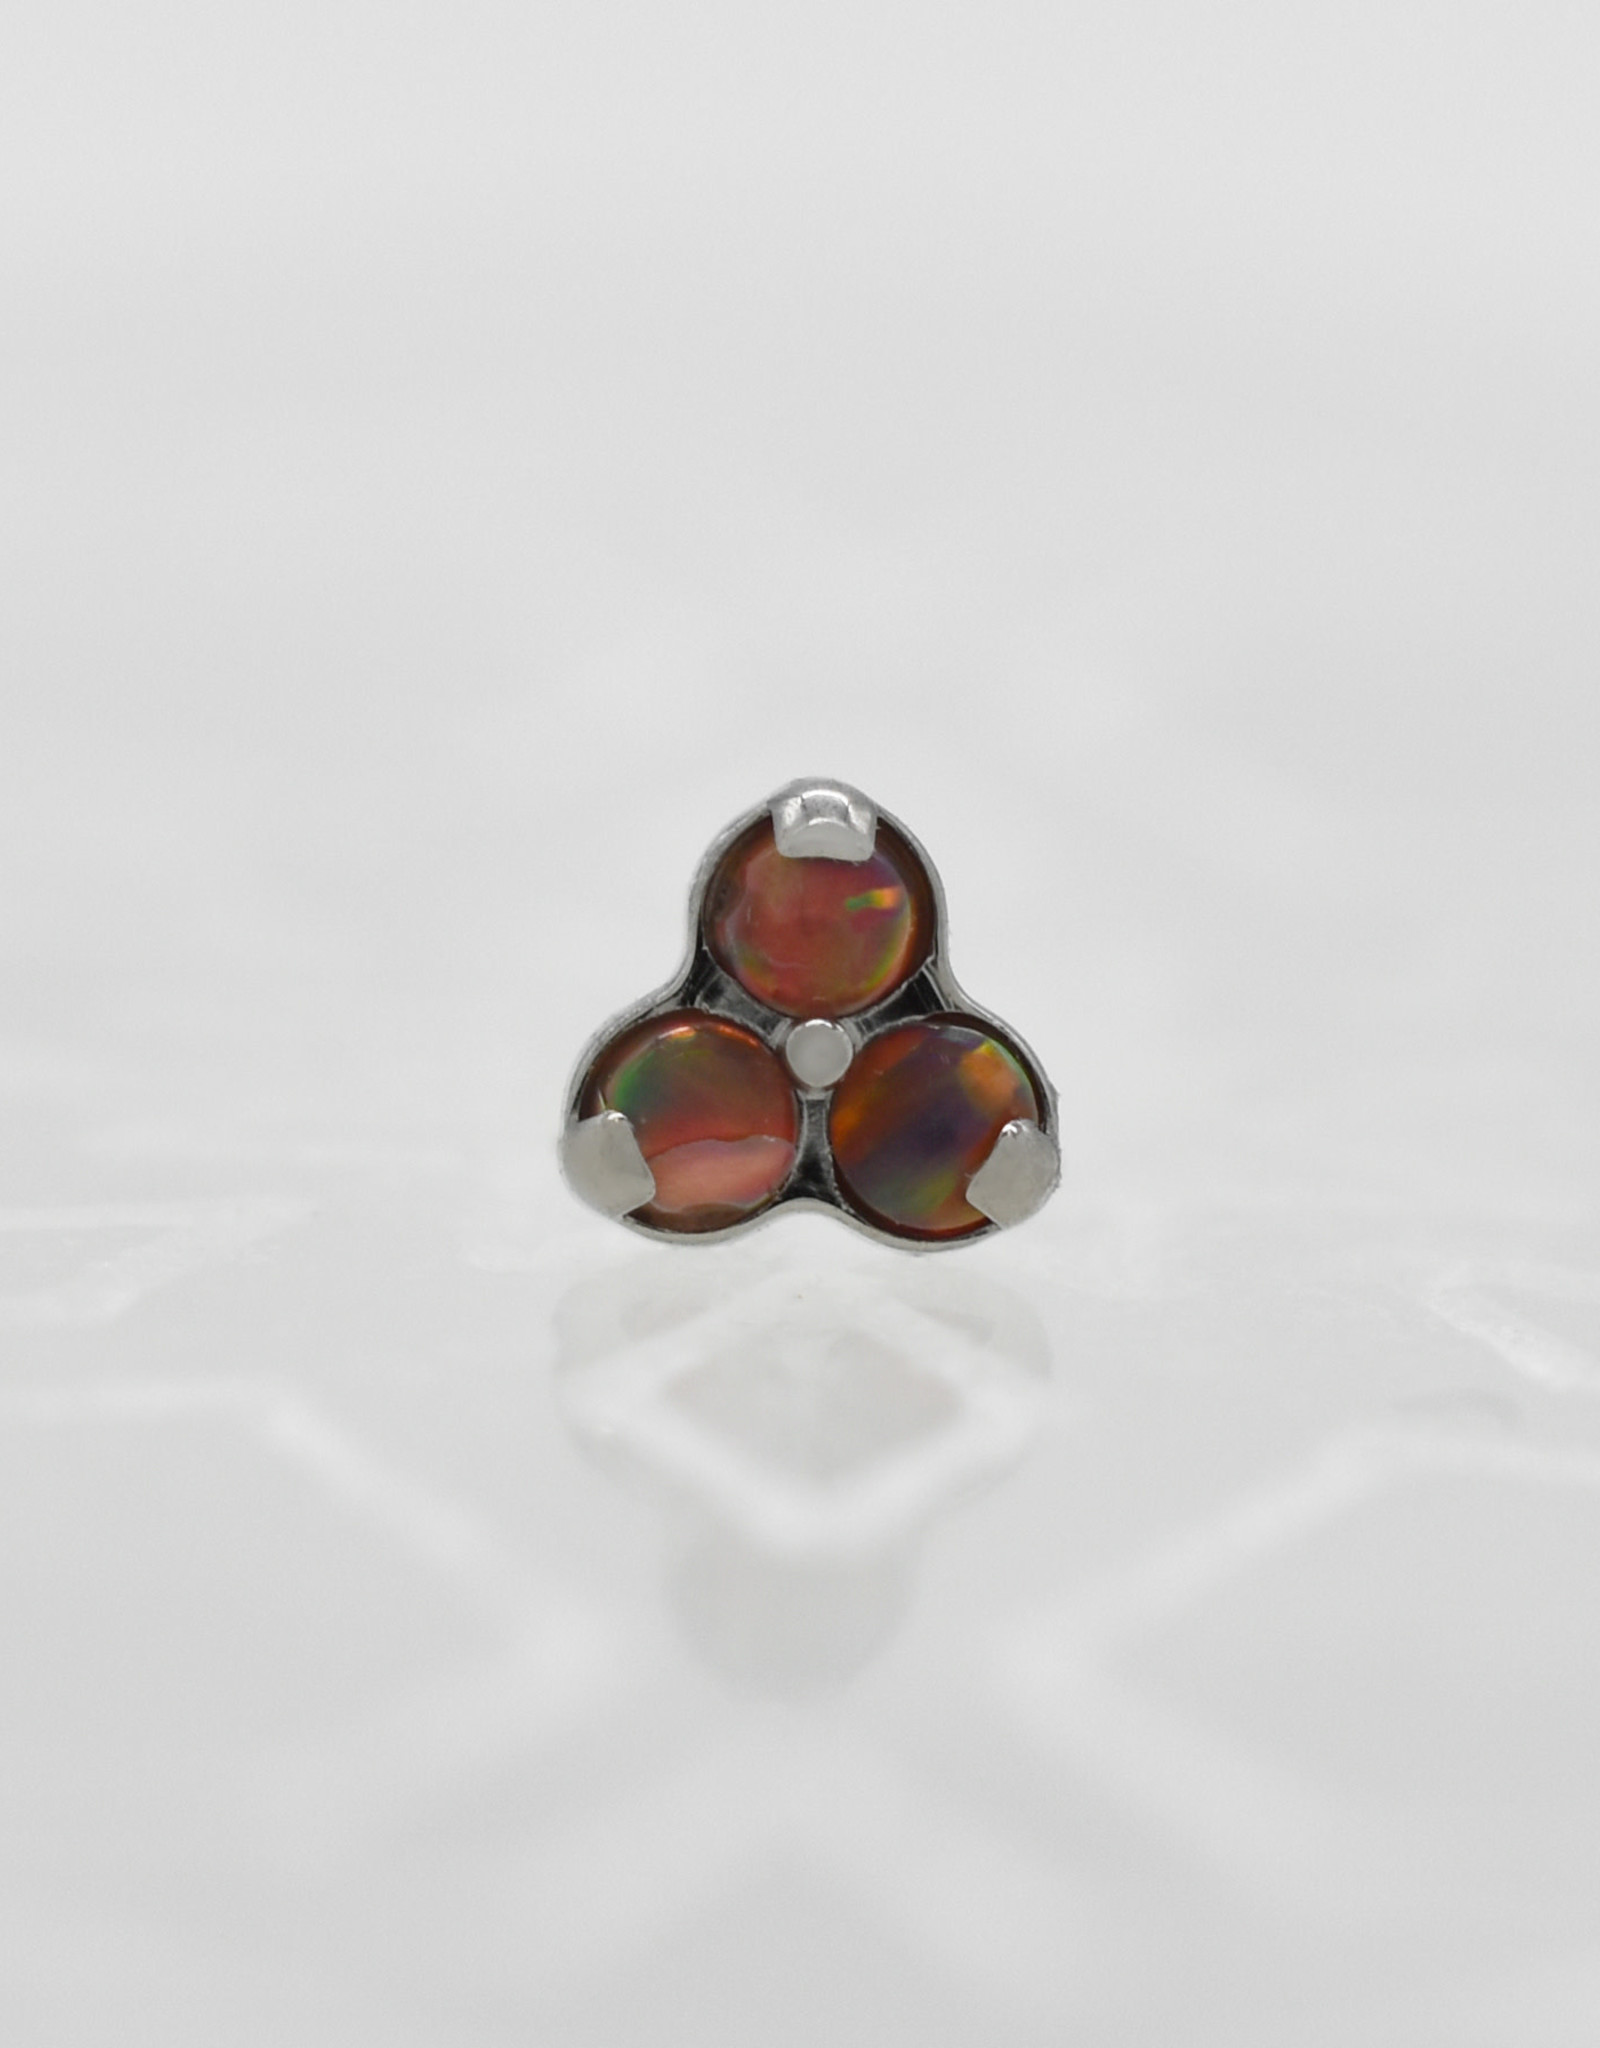 Industrial Strength Industrial Strength 1.5mm Tri Gem with Fire Red Opal Ti